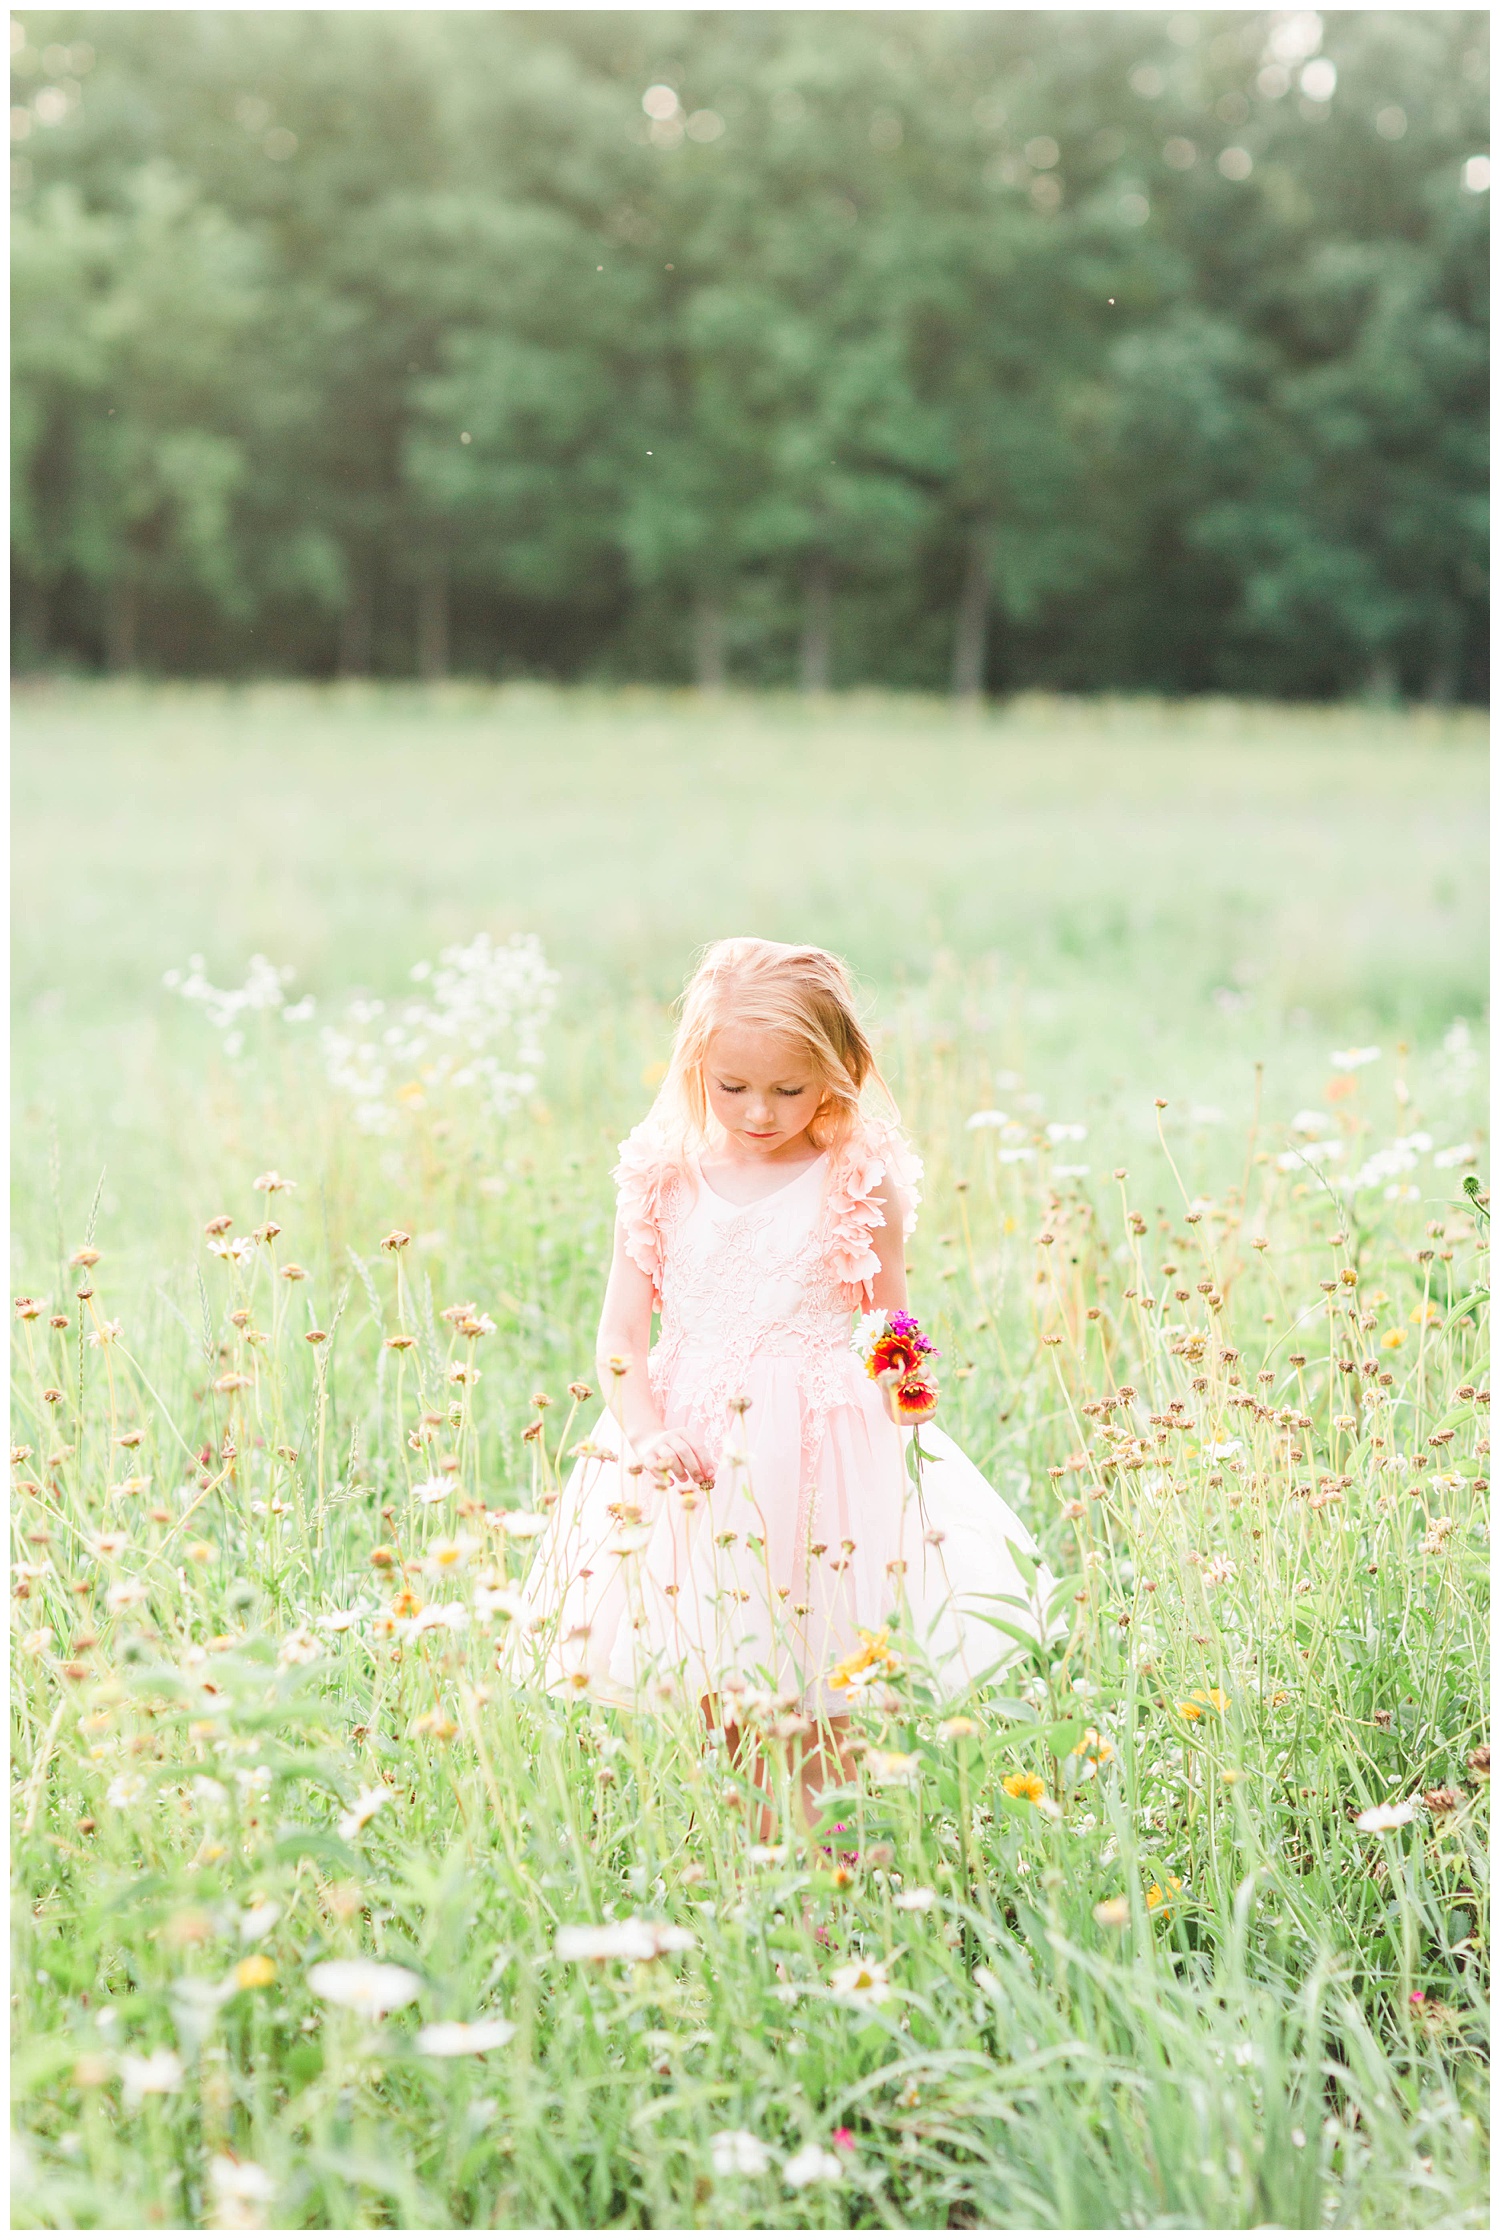 Little Liella stands in a field of wild flowers holding a bouquet wearing tutu du monde couture dress by Trish Scully | CB Studio